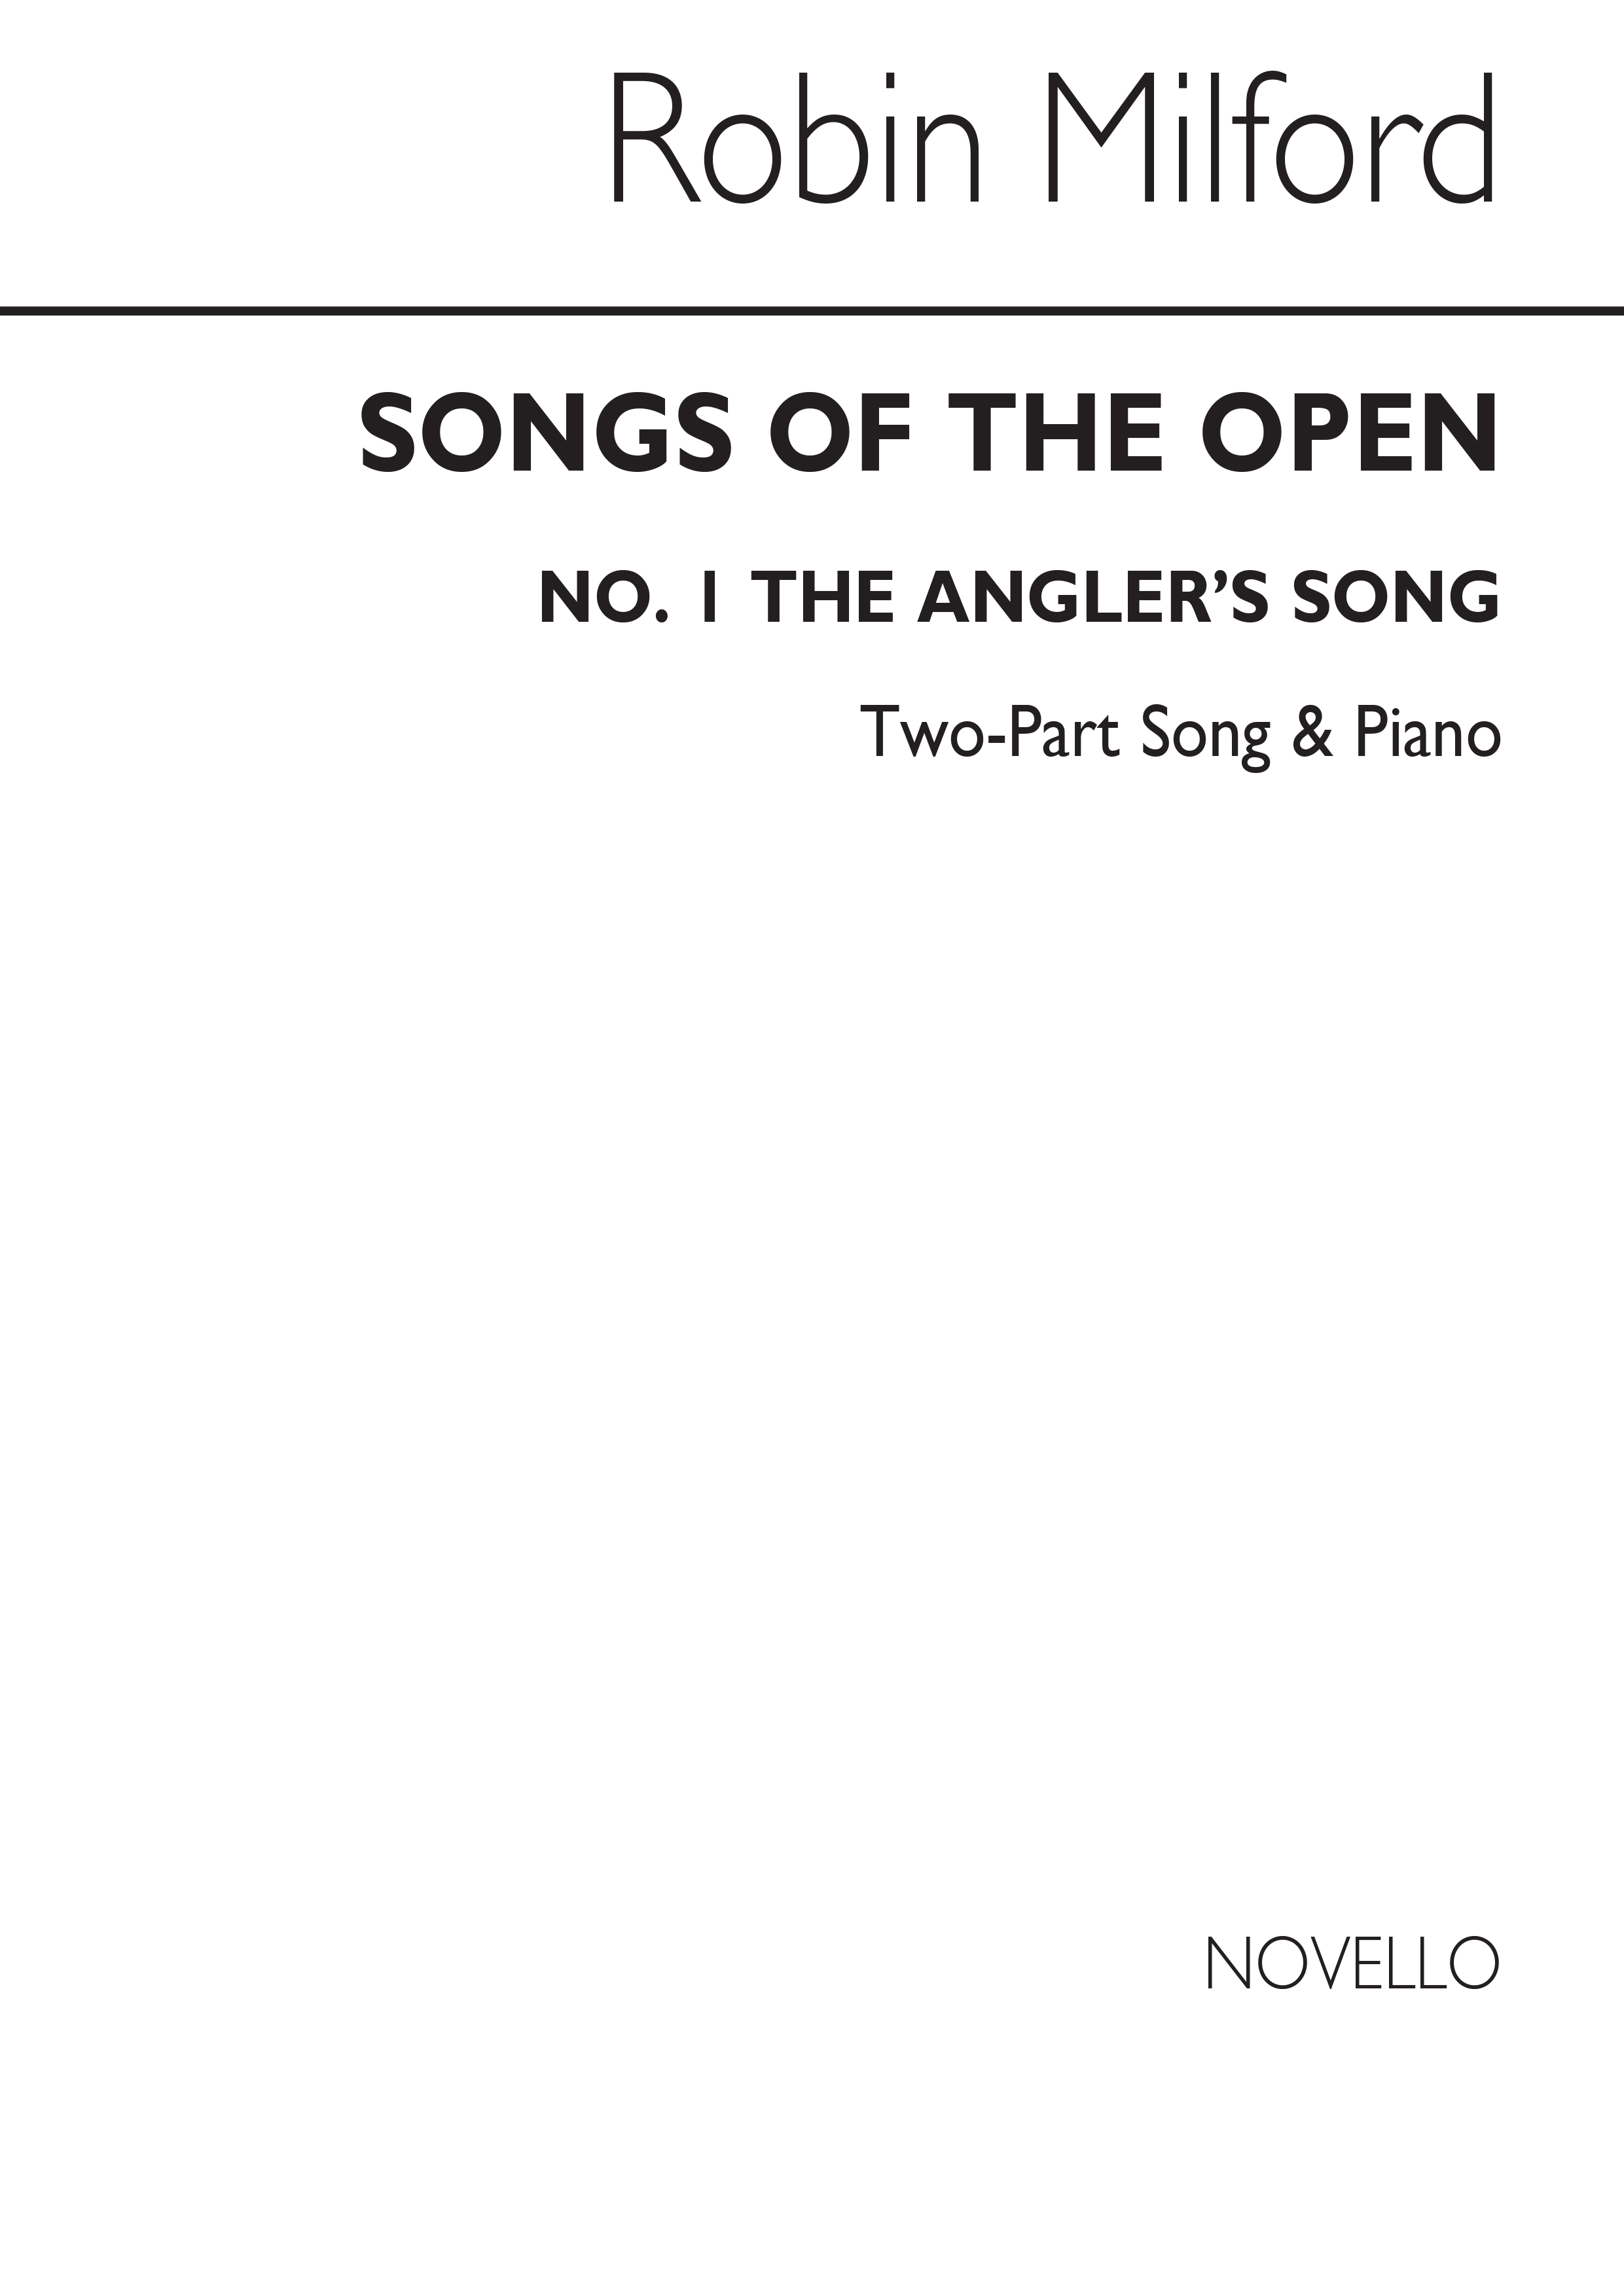 Robin Milford: The Angler's Song Op45 No.1 2-part/Piano